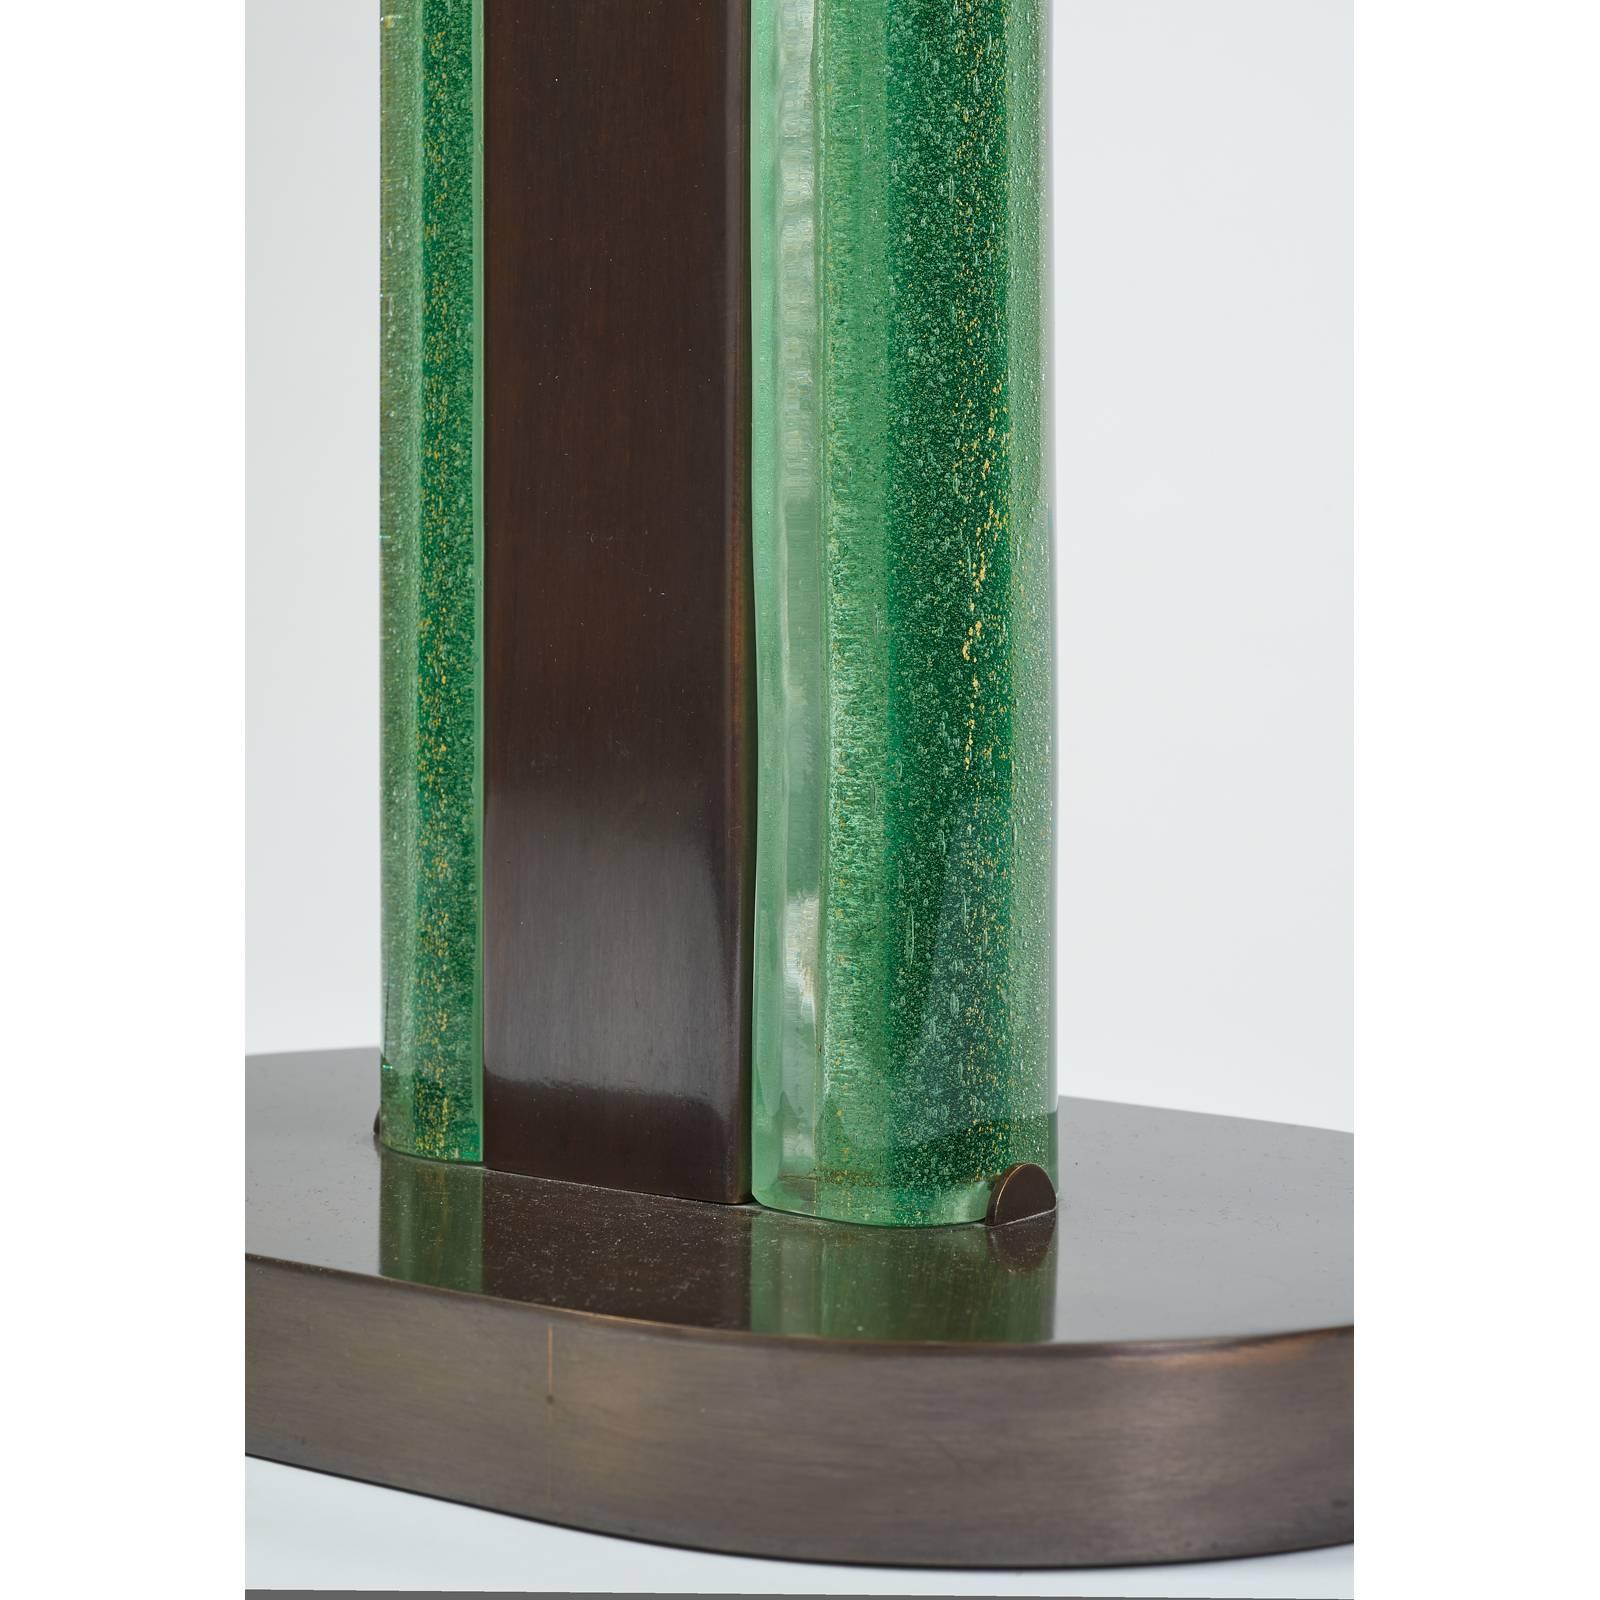 Roberto Rida (b. 1943)
A magnificent and important pair of table lamps by Roberto Rida,
with back lighted rods of gold flecked vintage, 1950s Venini glass, 
mounted on a dark bronze patina frame.
Signed, Italy, 2016
Limited edition of four pair